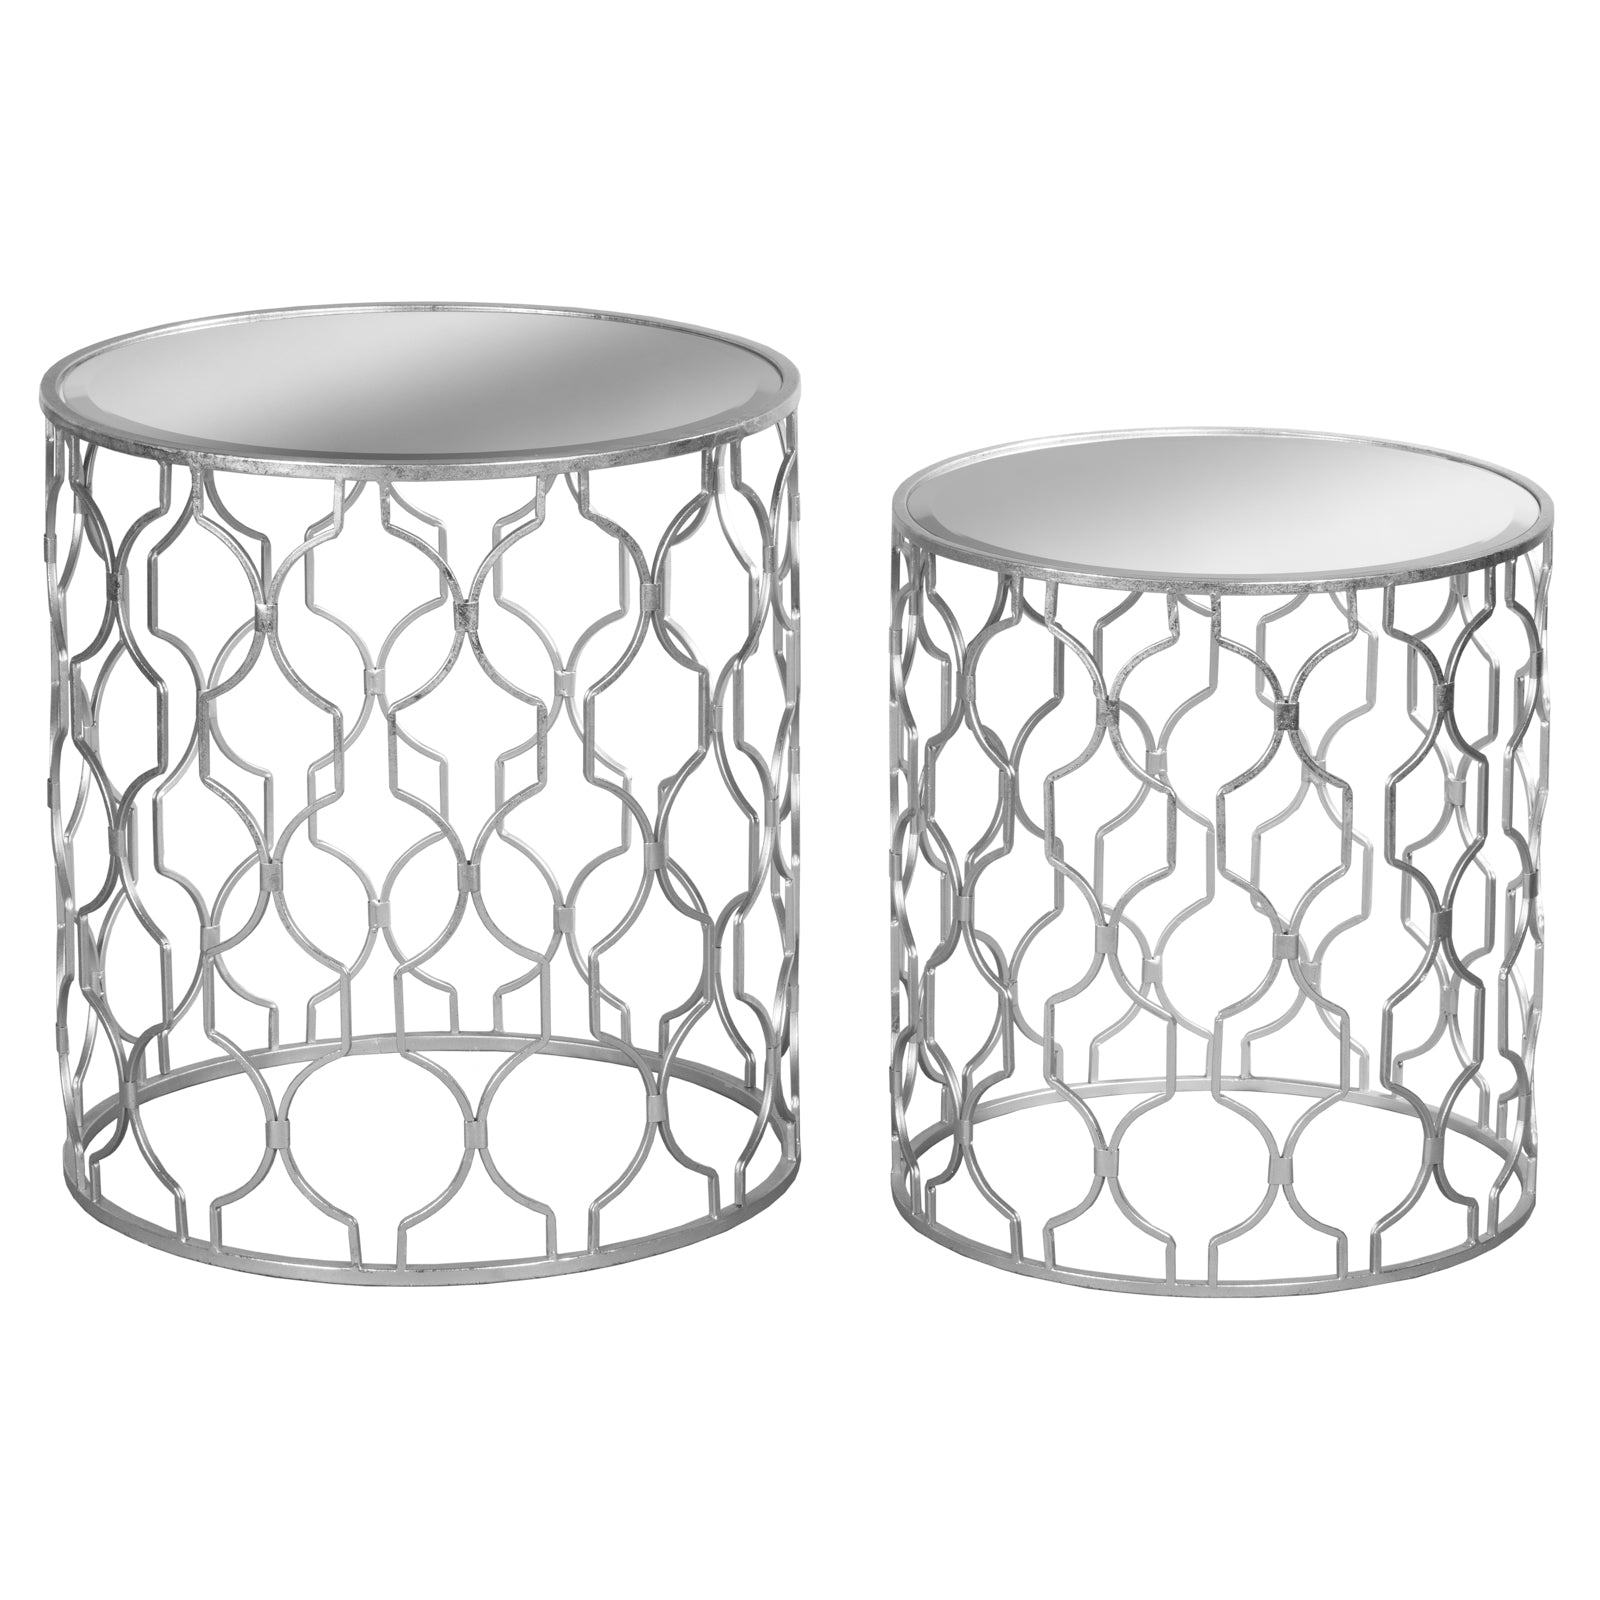 Set of Two Arabesque Silver Foil Mirrored Side Tables-product